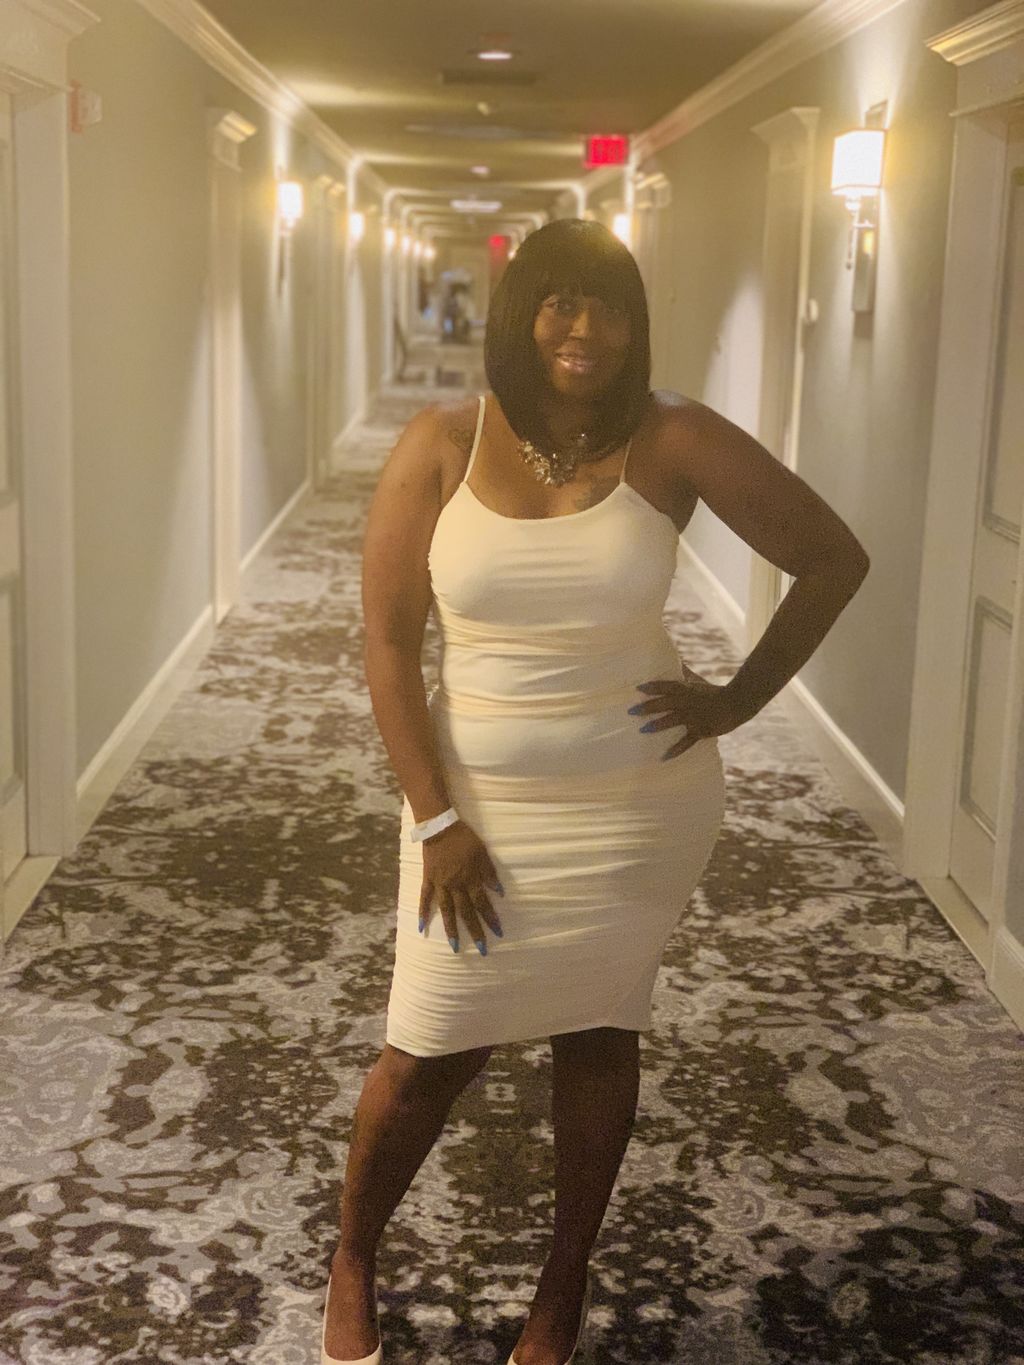 Uploaded by Princess  McCarthy  from Essence Festival 2019 on Saturday, October 05, 2019